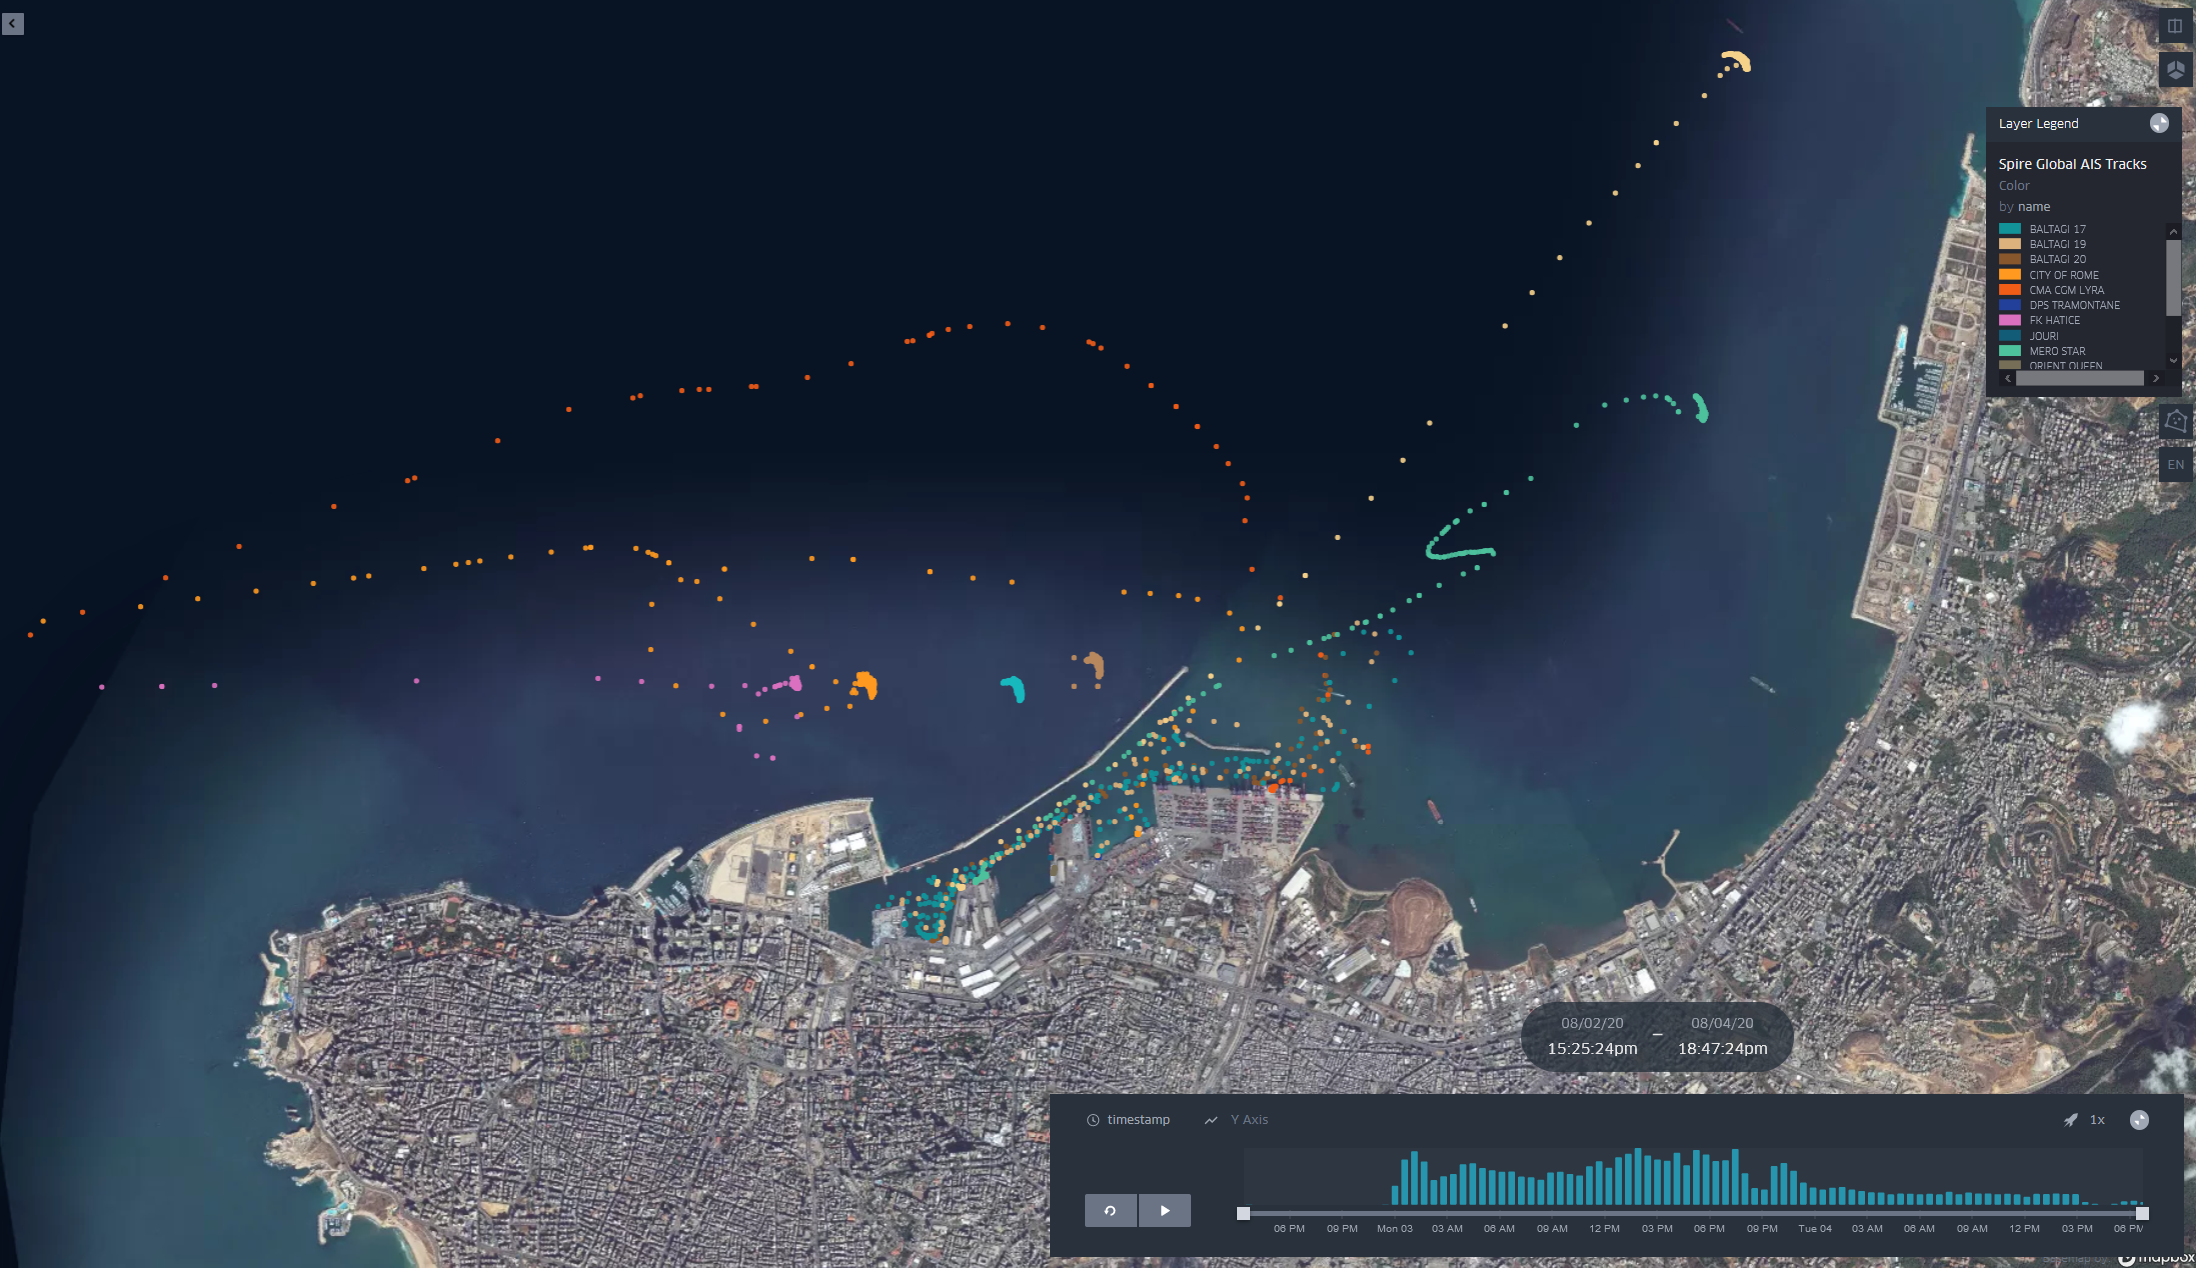 Ships in Beirut port area Aug 4th - AIS data